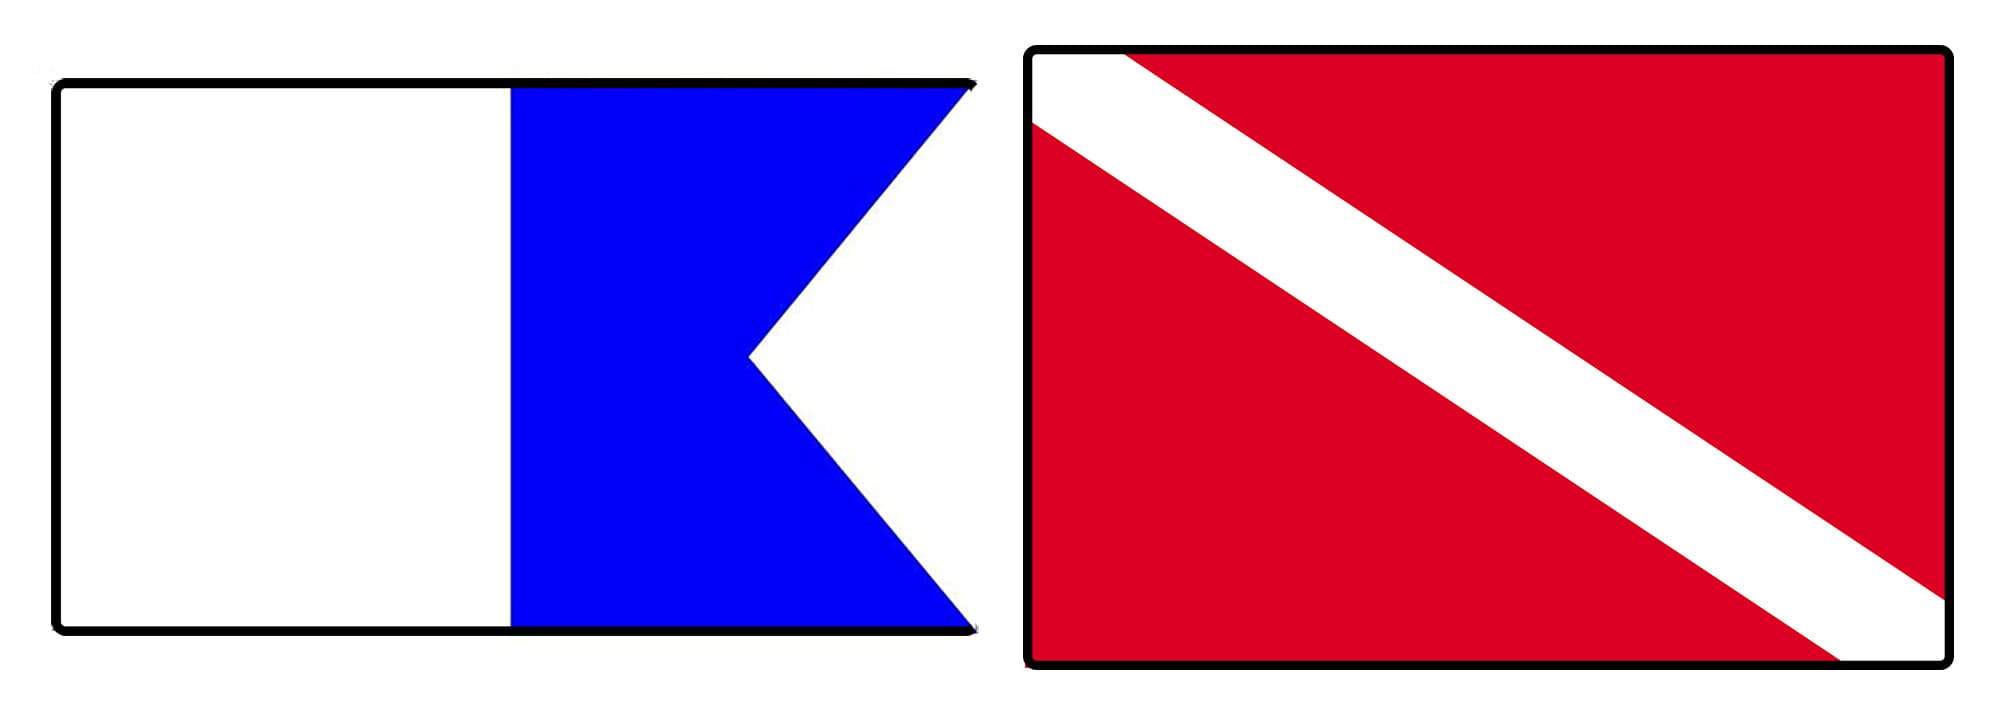 Blue and white alpha dive flag to the left of a red and white sport diver flag